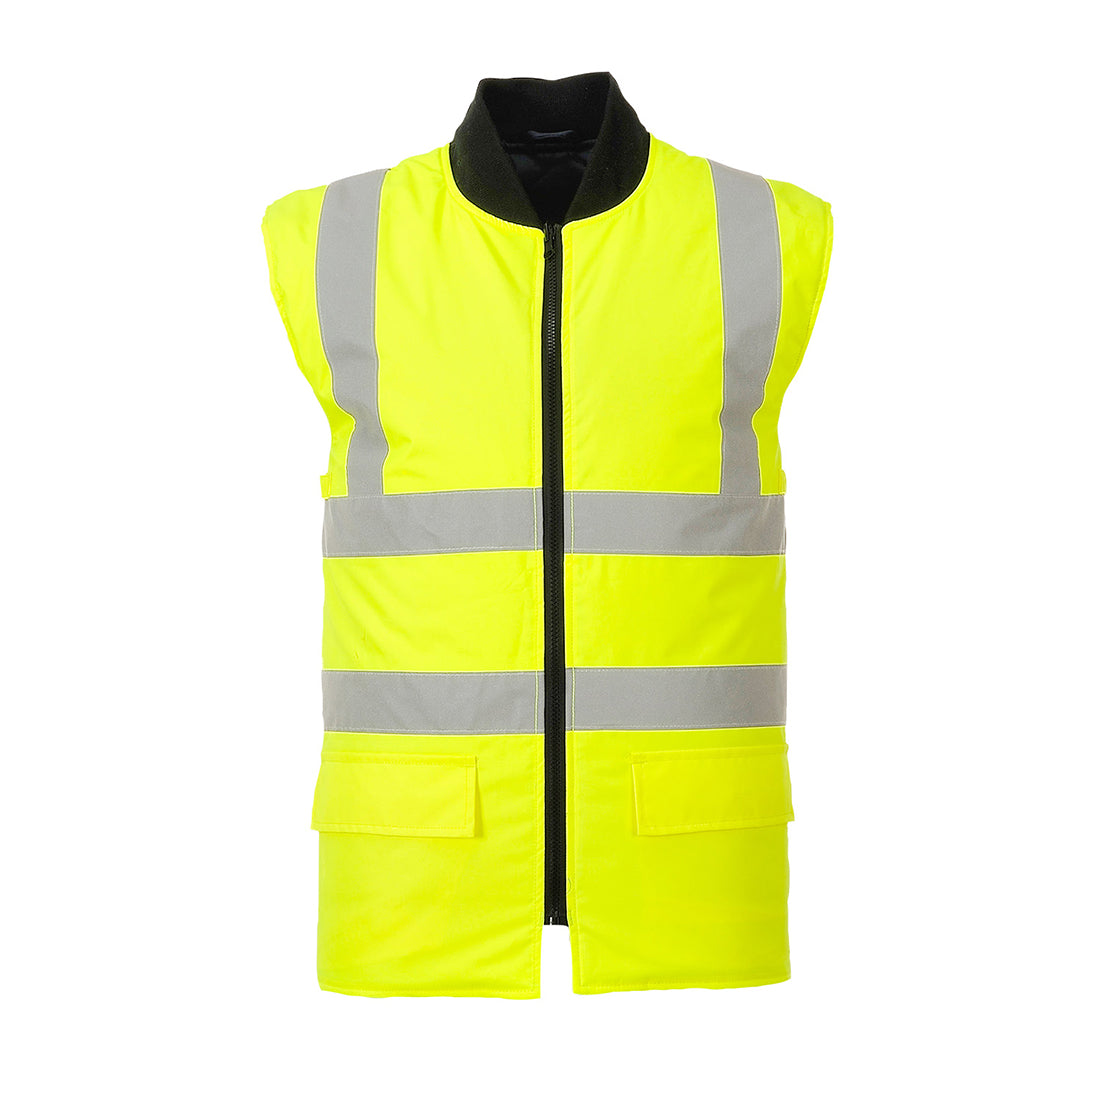 Portwest S471 Hi Vis 4-in-1 Contrast Traffic Jacket 1#colour_yellow-navy 2#colour_yellow-navy